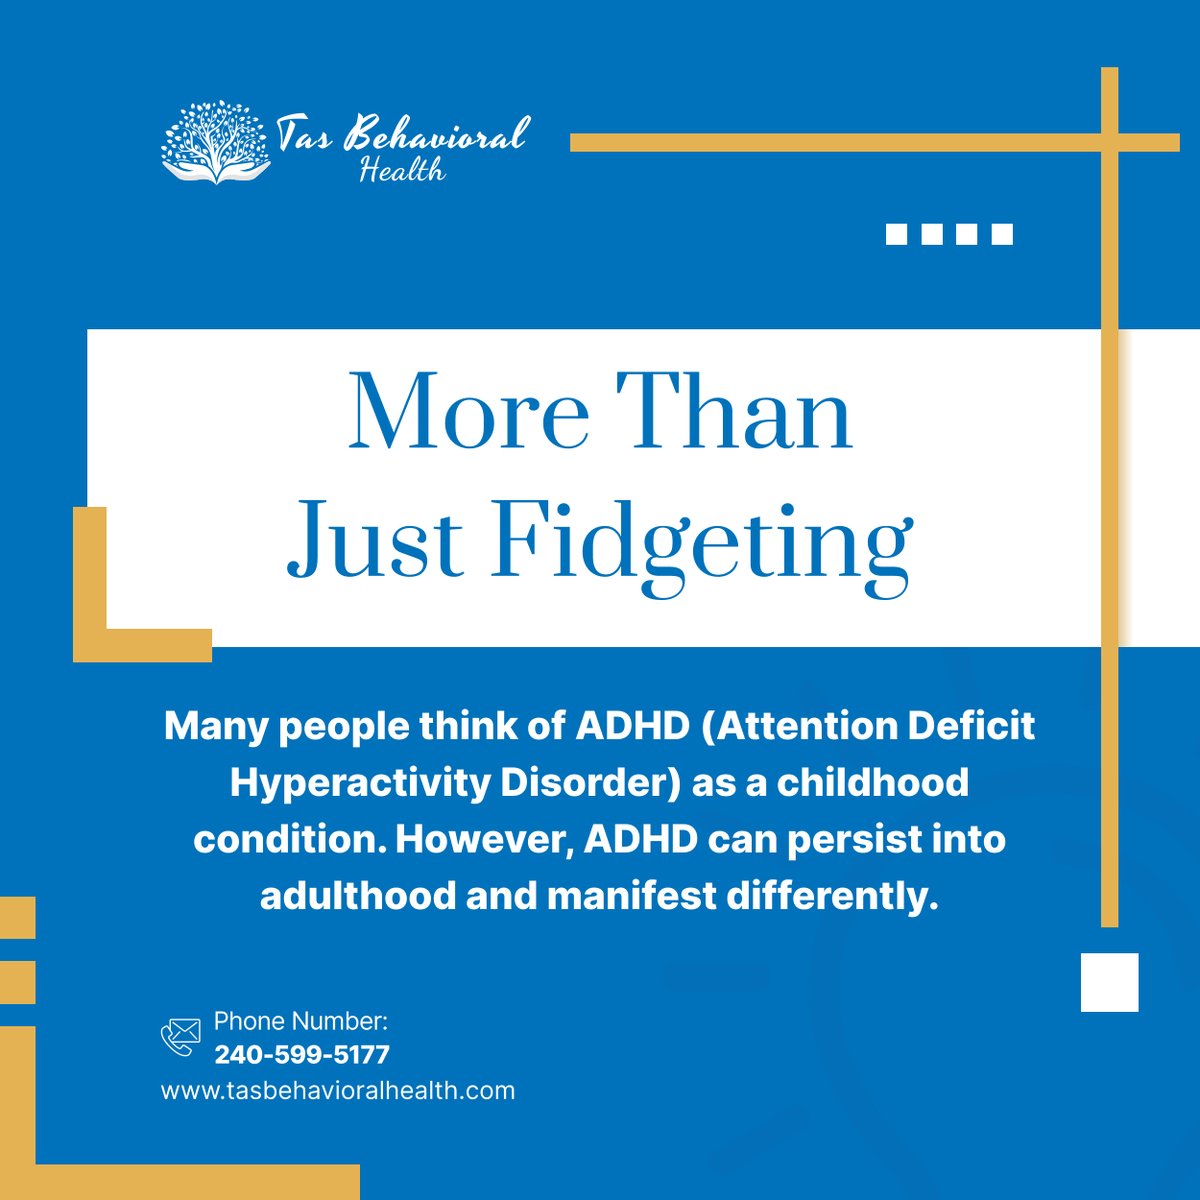 ADHD isn't just for kids! Understanding the adult presentation of ADHD can help individuals and those around them navigate challenges and find solutions. #CumberlandMD #MentalHealthClinic #AdultADHD